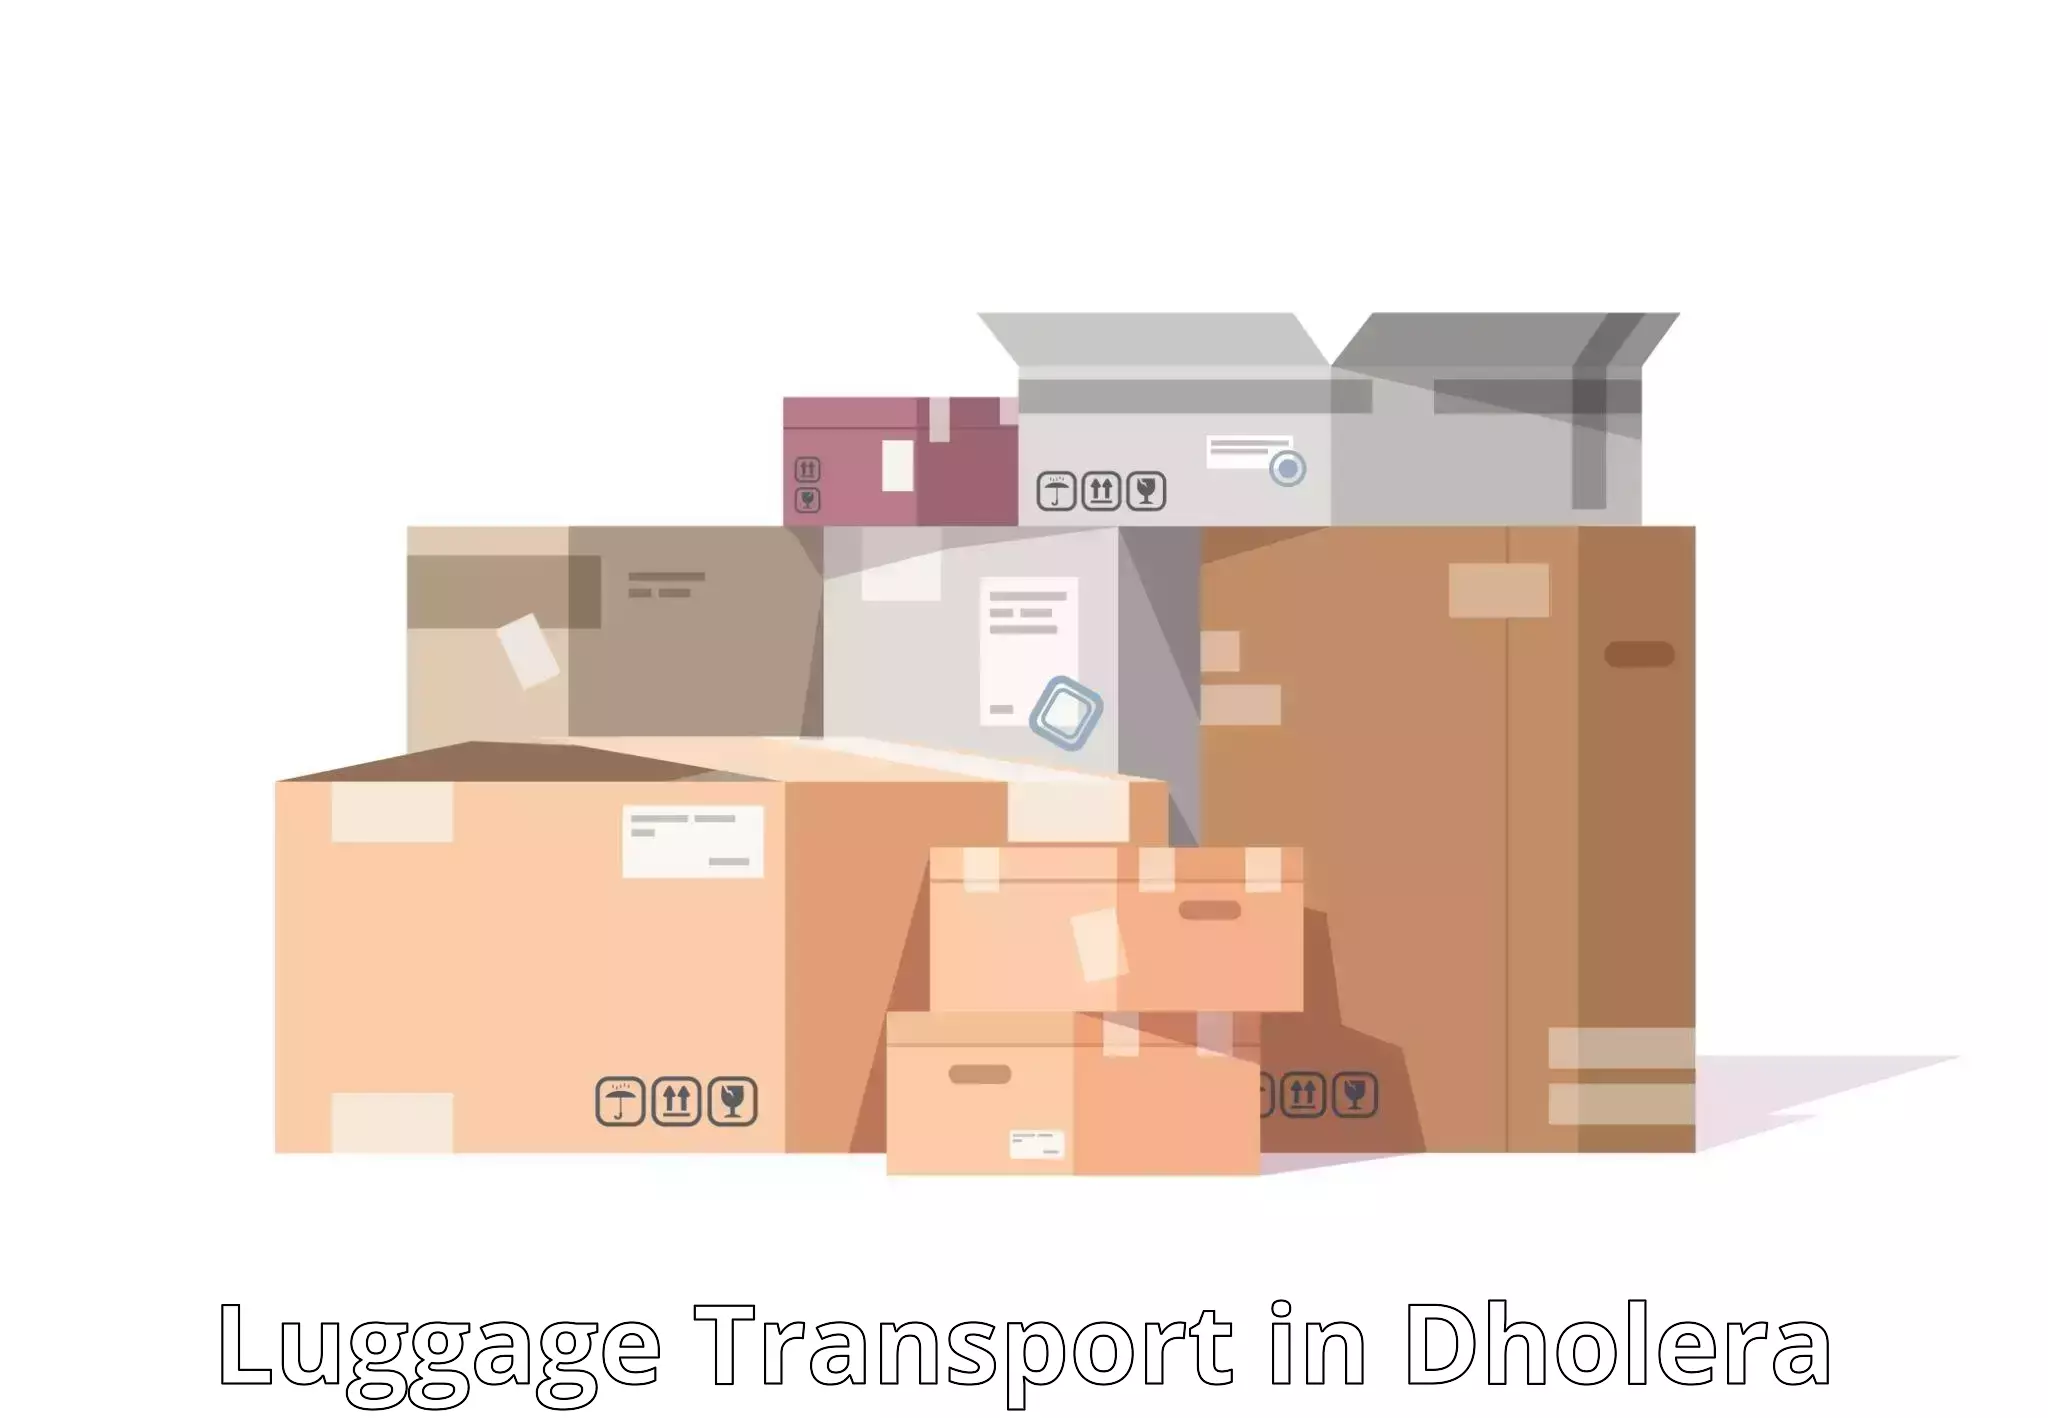 Luggage transport consultancy in Dholera